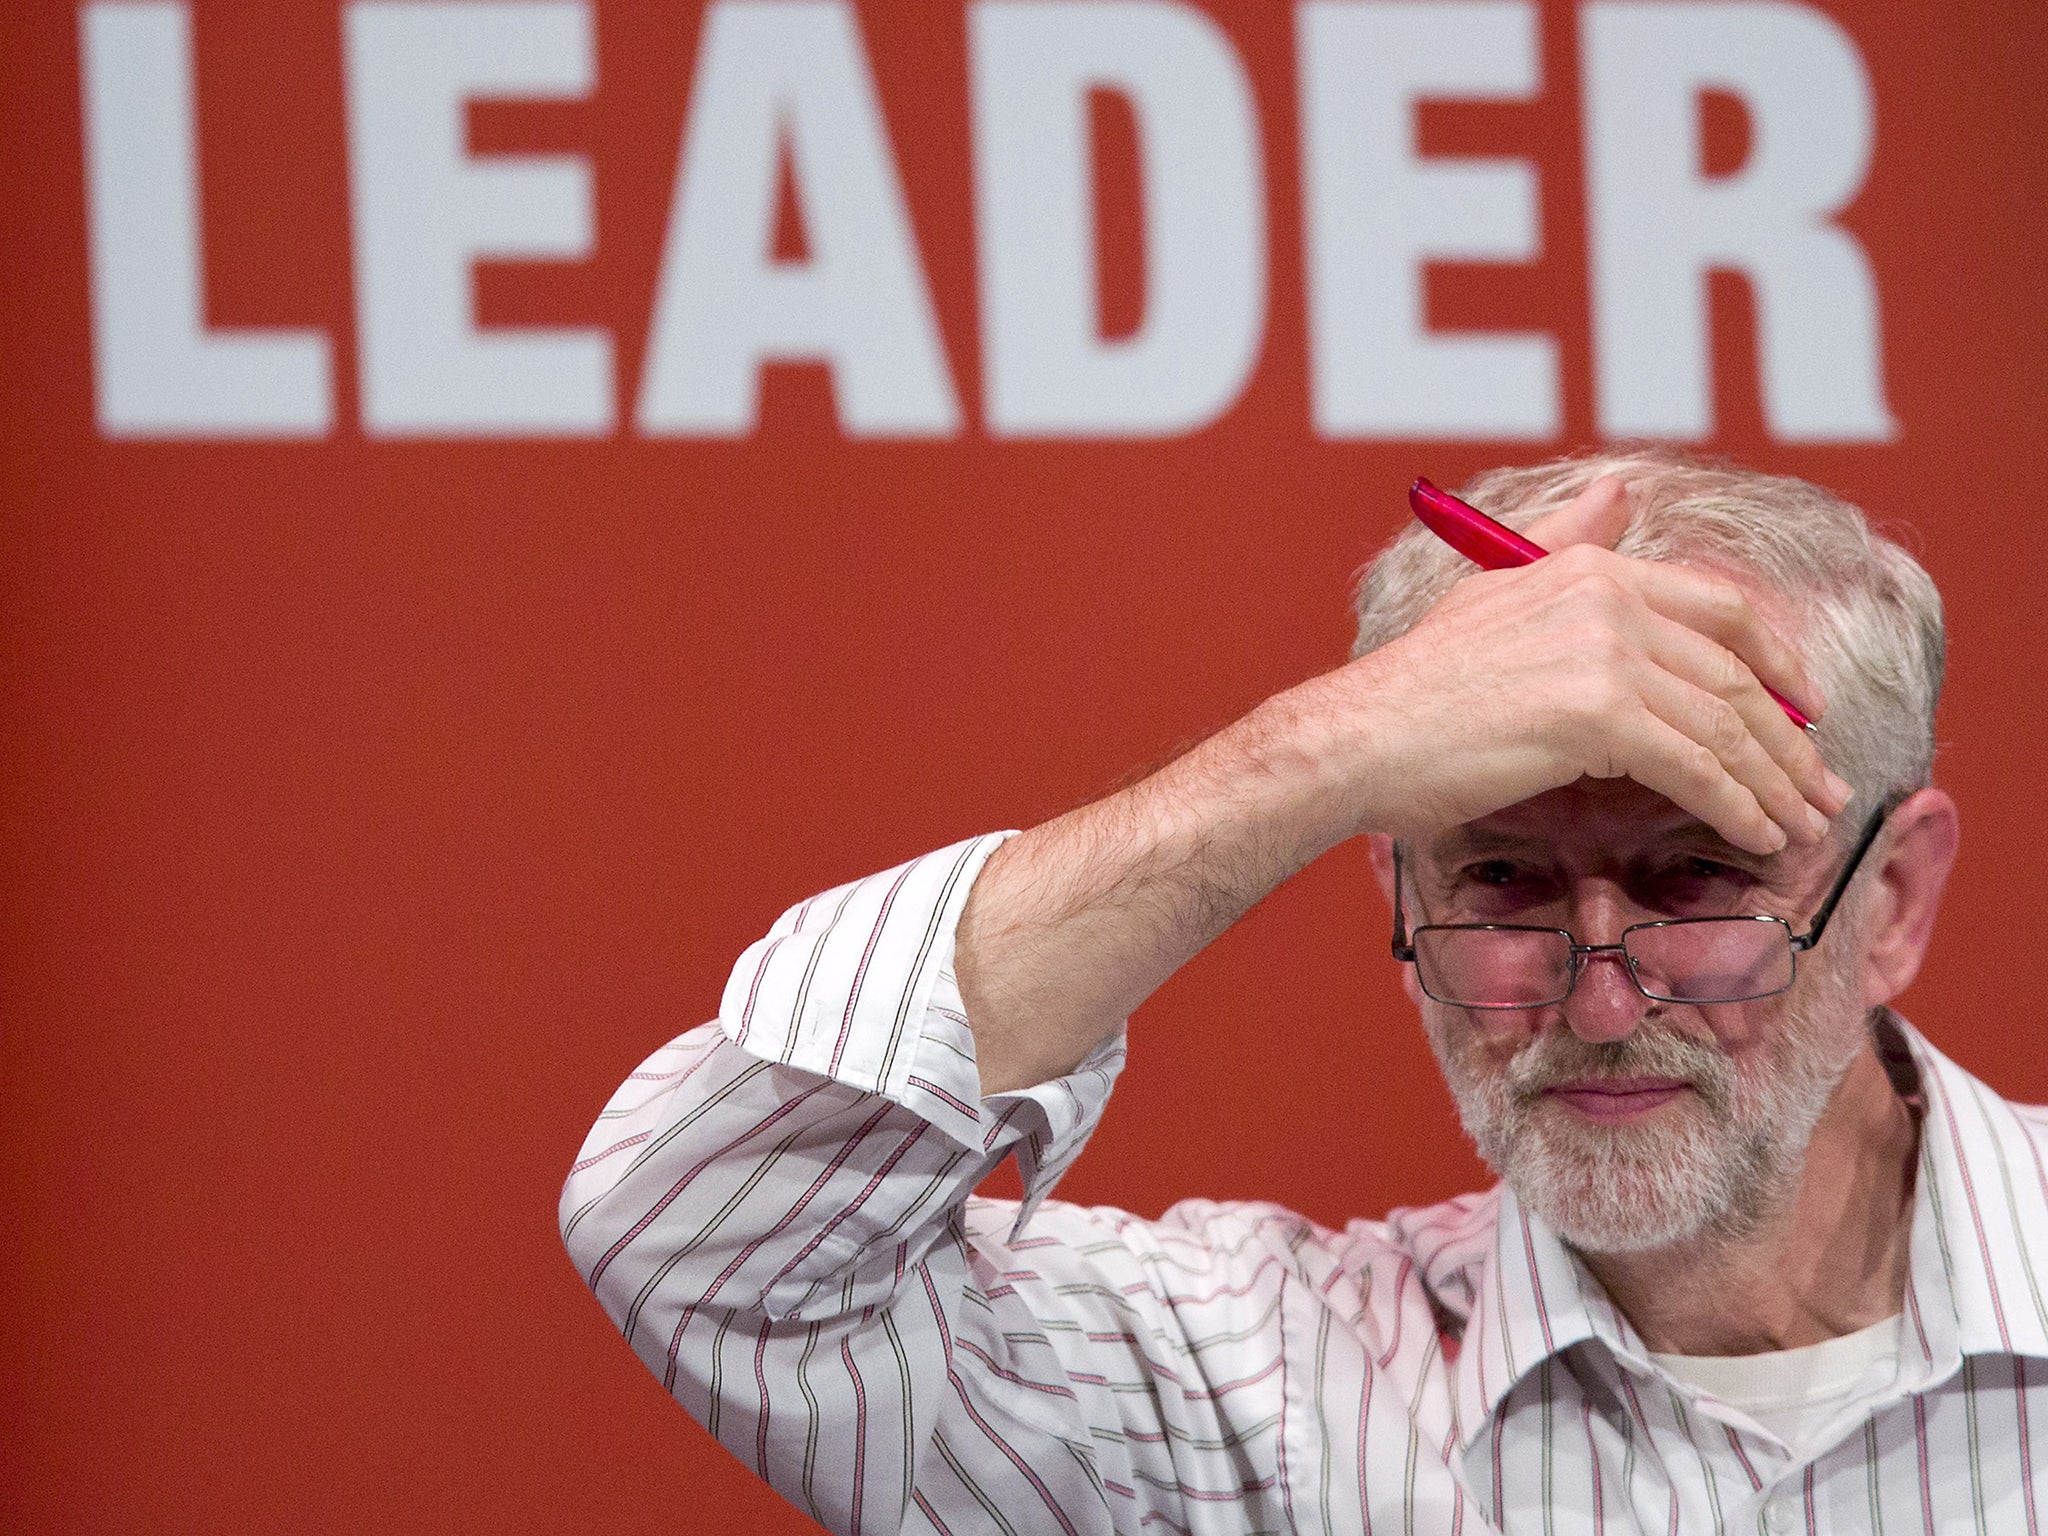 A plot is already underway from within the Labour party to oust Jeremy Corbyn as leader before the next election